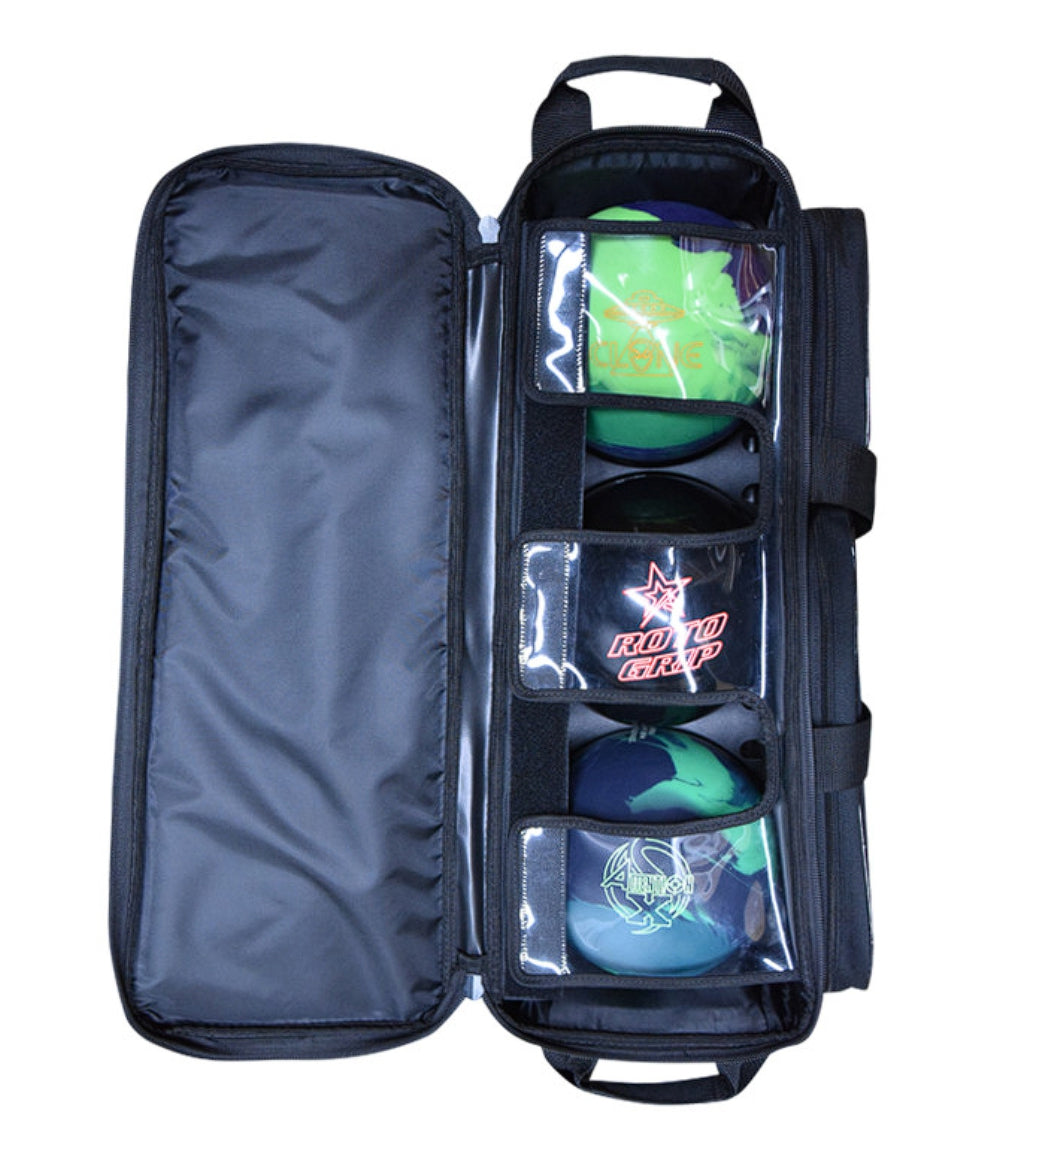 Roto Grip 3-Ball All-Star Edition Roller Blackout Bowling Bags FREE SHIPPING